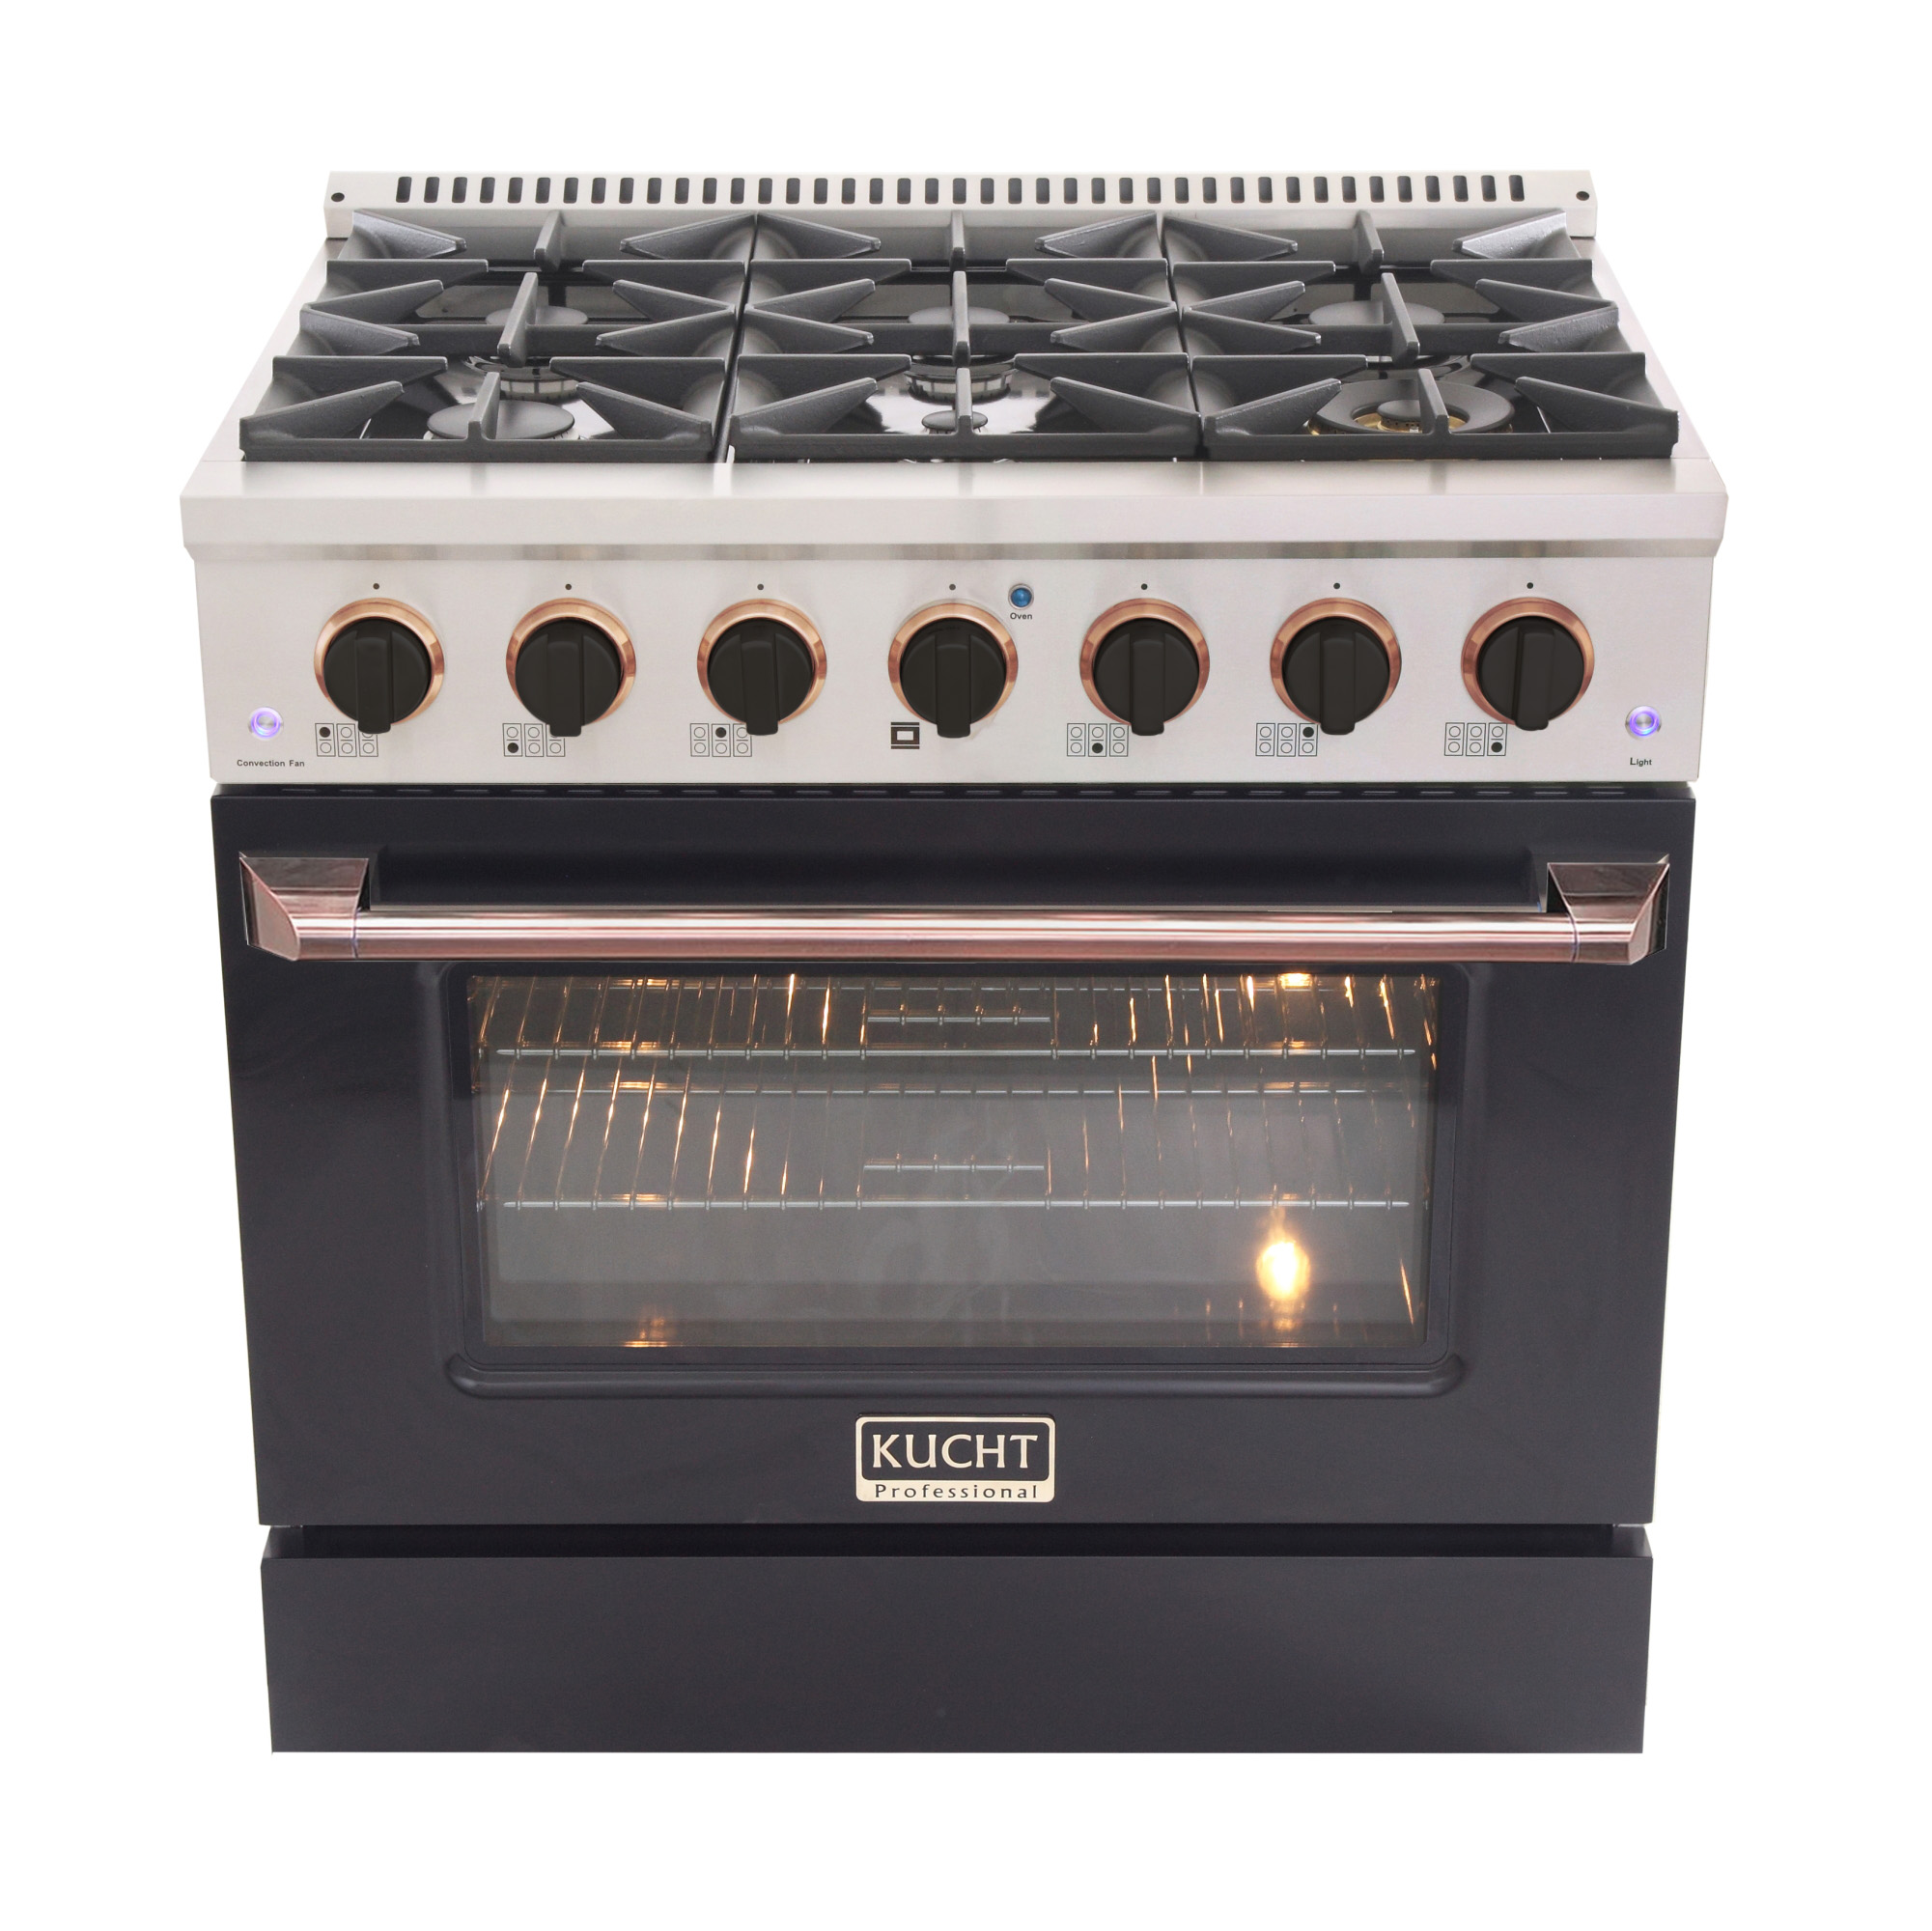 KUCHT Professional 36 in. 5.2 cu. ft. Natural Gas Range with Sealed Burners and Convection Oven in Stainless Steel customized